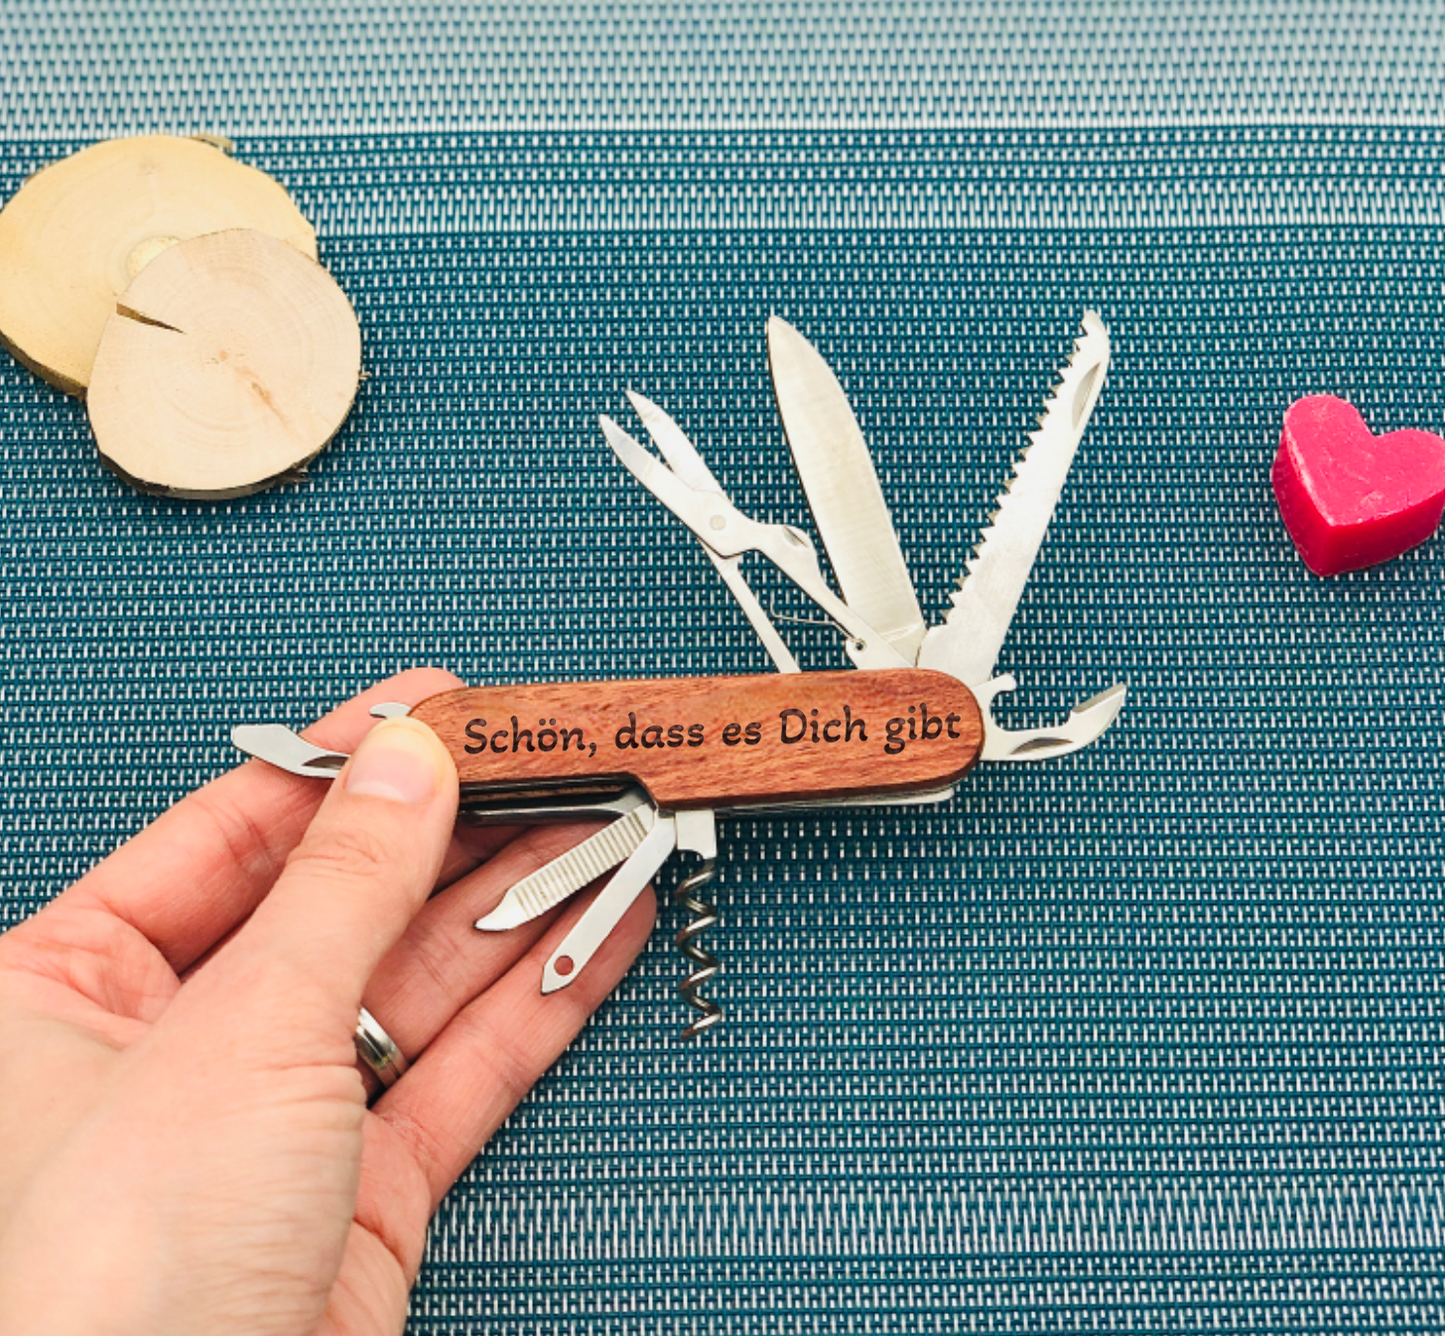 Gift for Father's Day - Pocket knife with wooden handle - Gift with engraving for Dad / Grandpa for Father's Day - Father's Day gift personalized